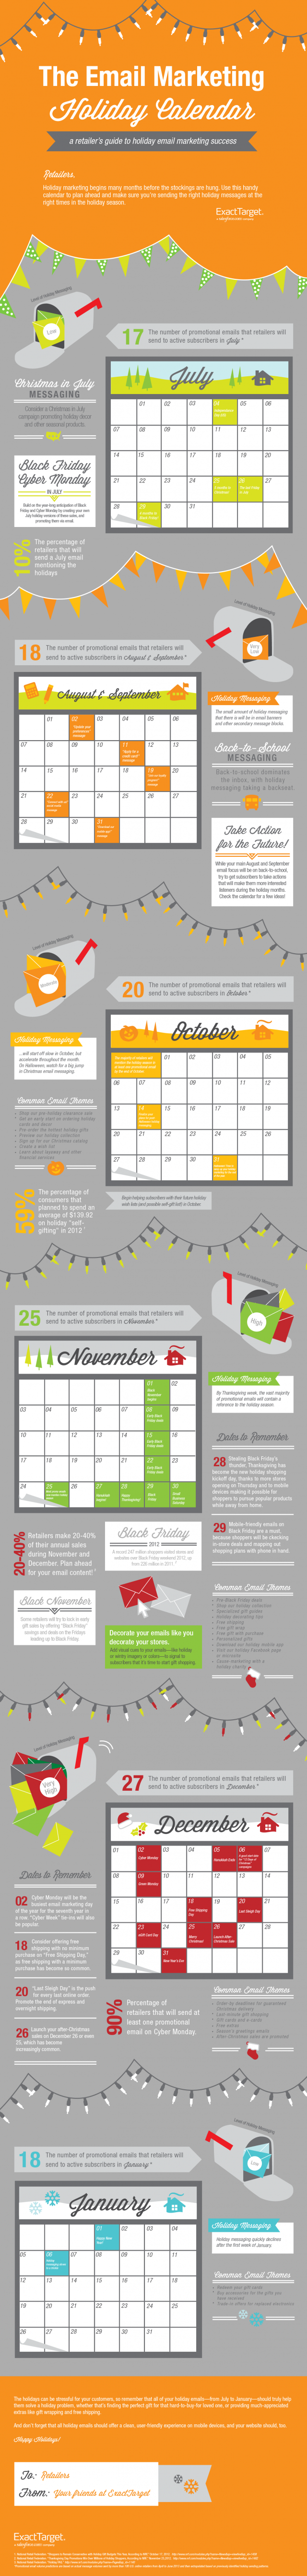 The Email Marketing Holiday Calendar Infographic Happy Hour Hangouts